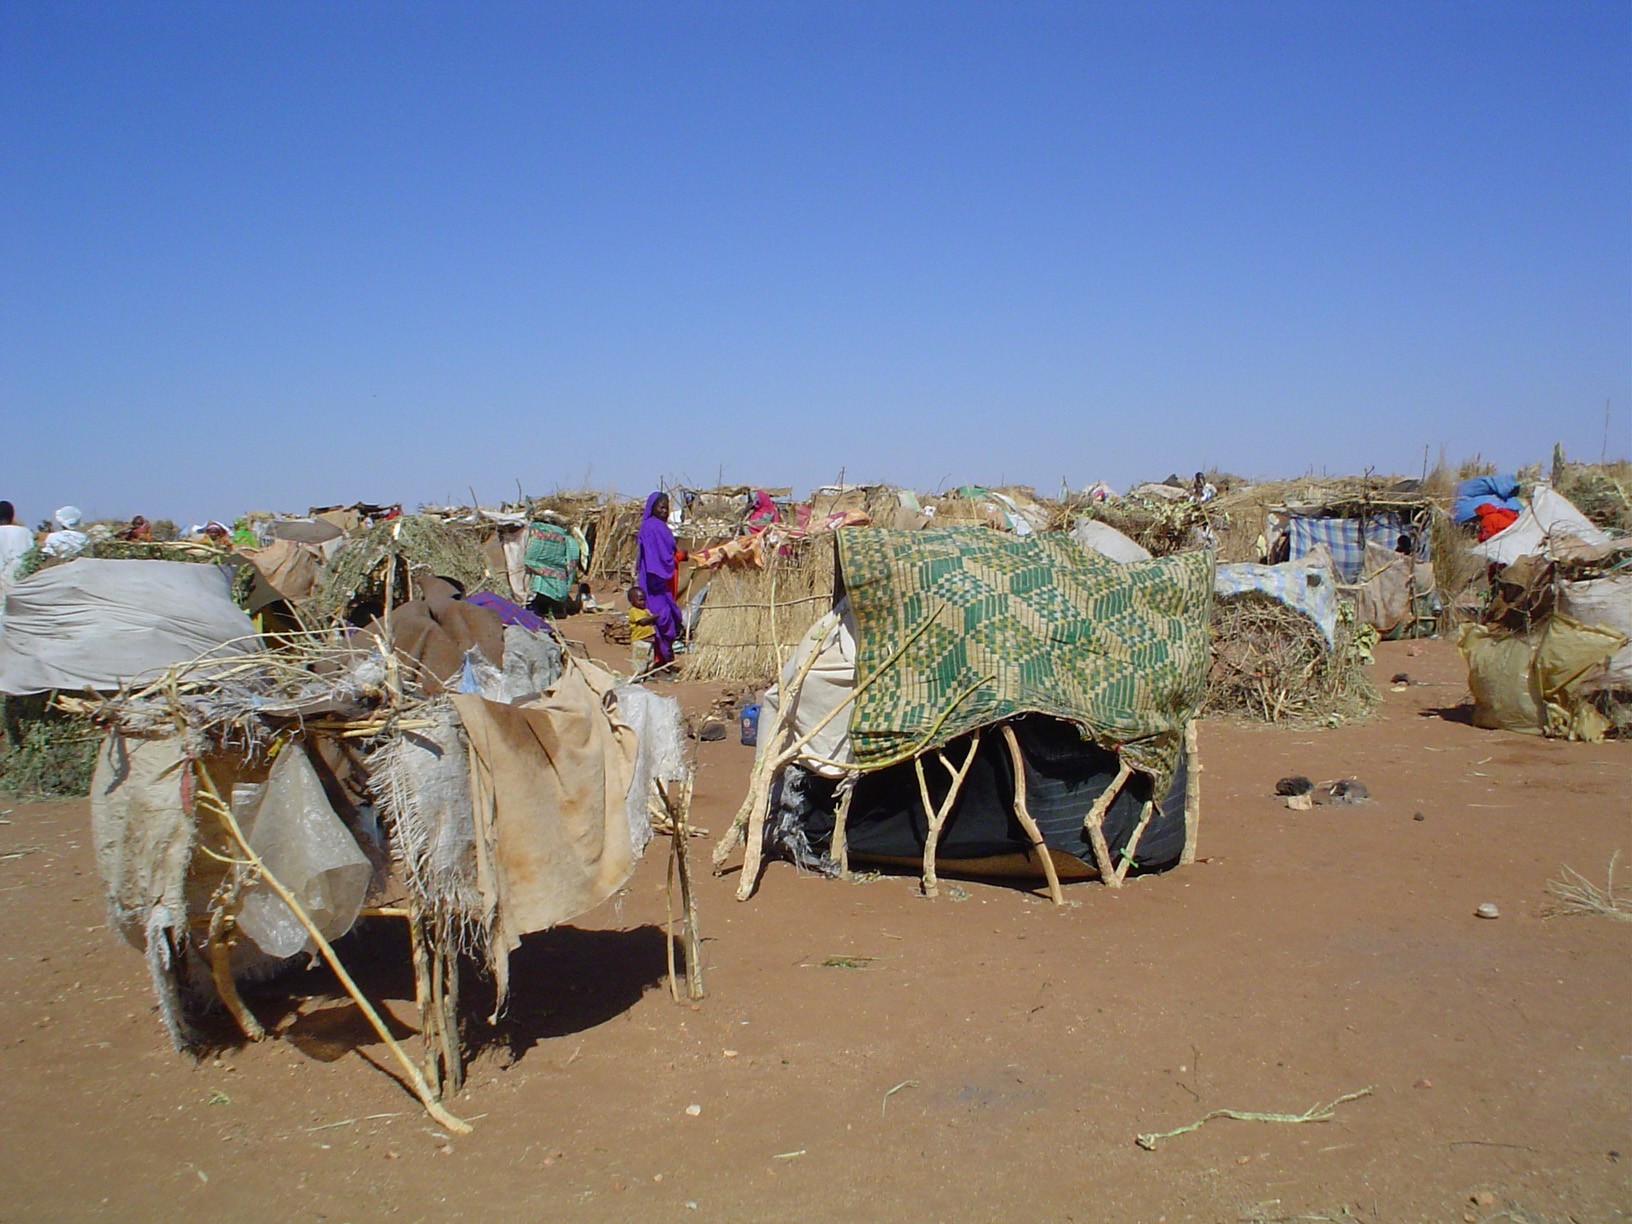 A refugee camp holding thousands of displaced Darfurians/Sudanese in the aftermath of war in the western part of Sudan.